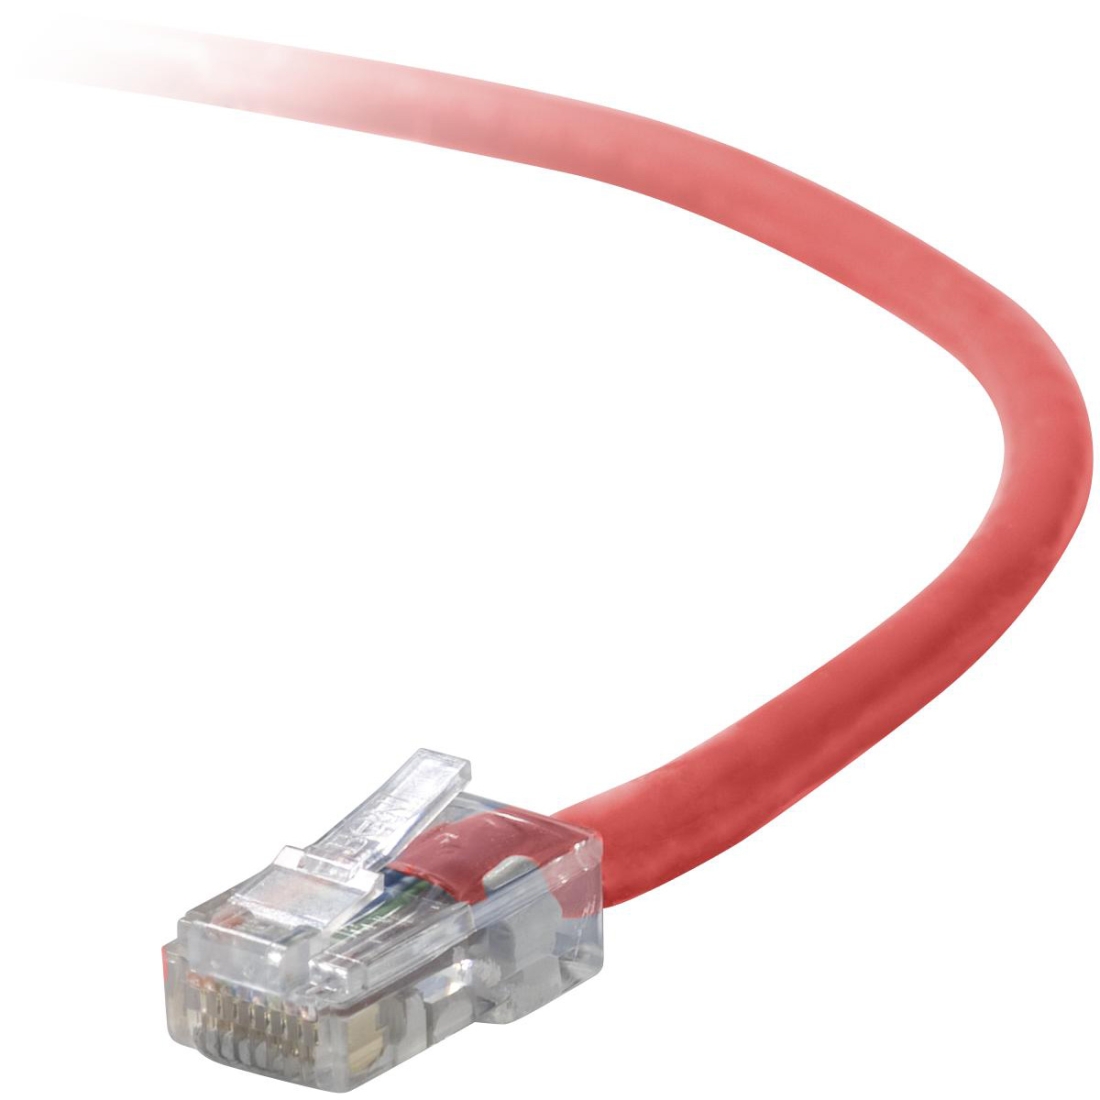 BELKIN A3L791 08 RED 8 ft. Cat 5E Red Network Cable